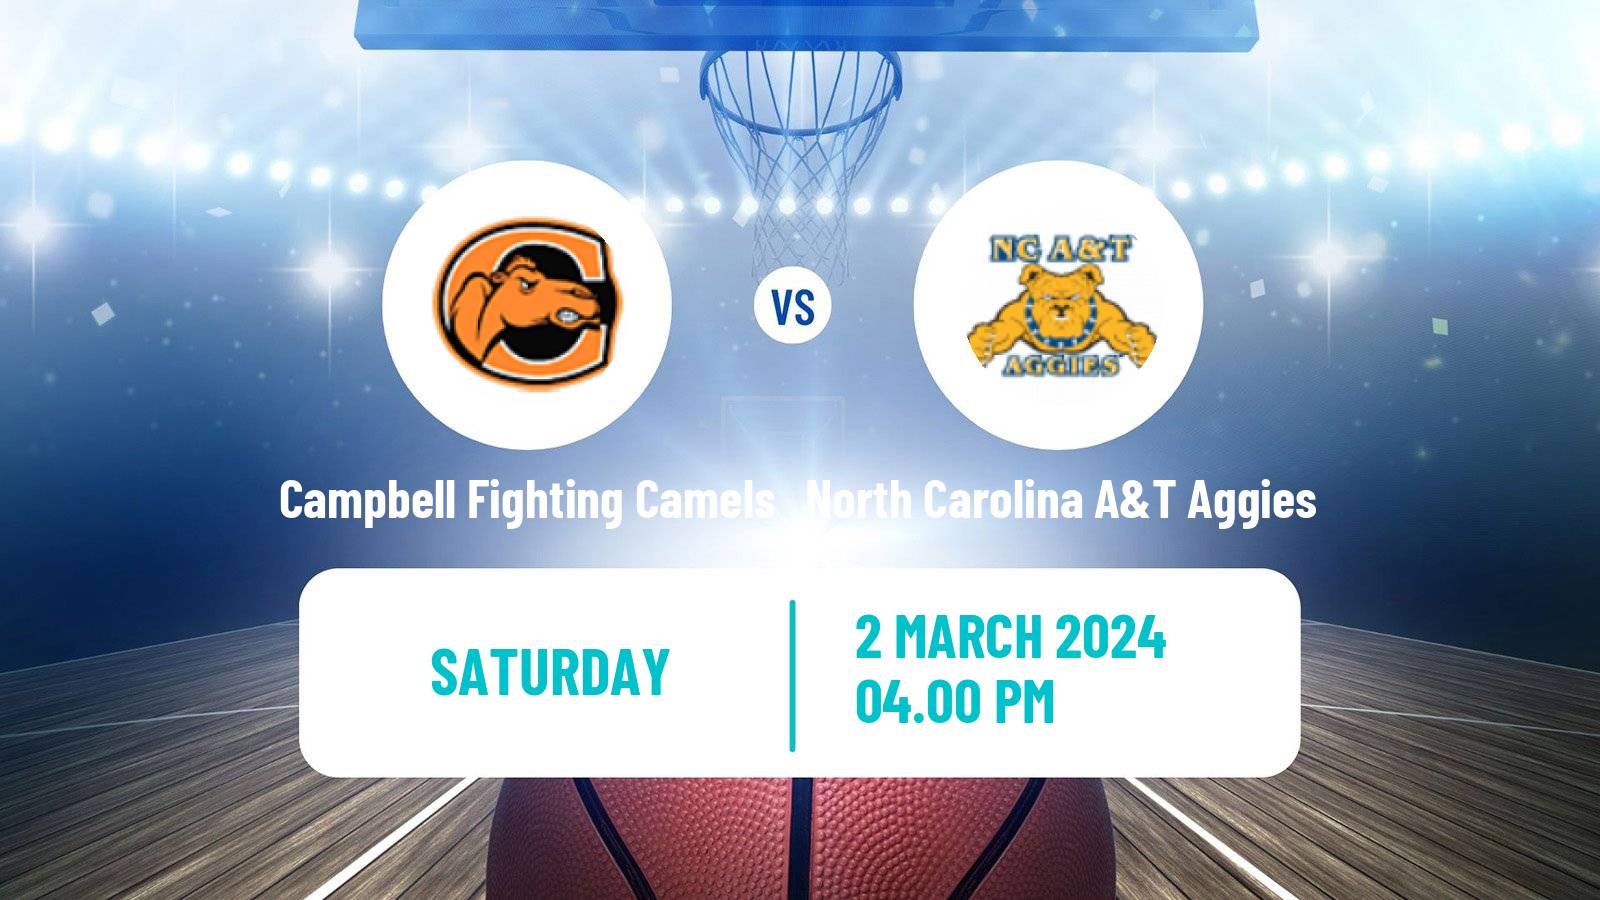 Basketball NCAA College Basketball Campbell Fighting Camels - North Carolina A&T Aggies